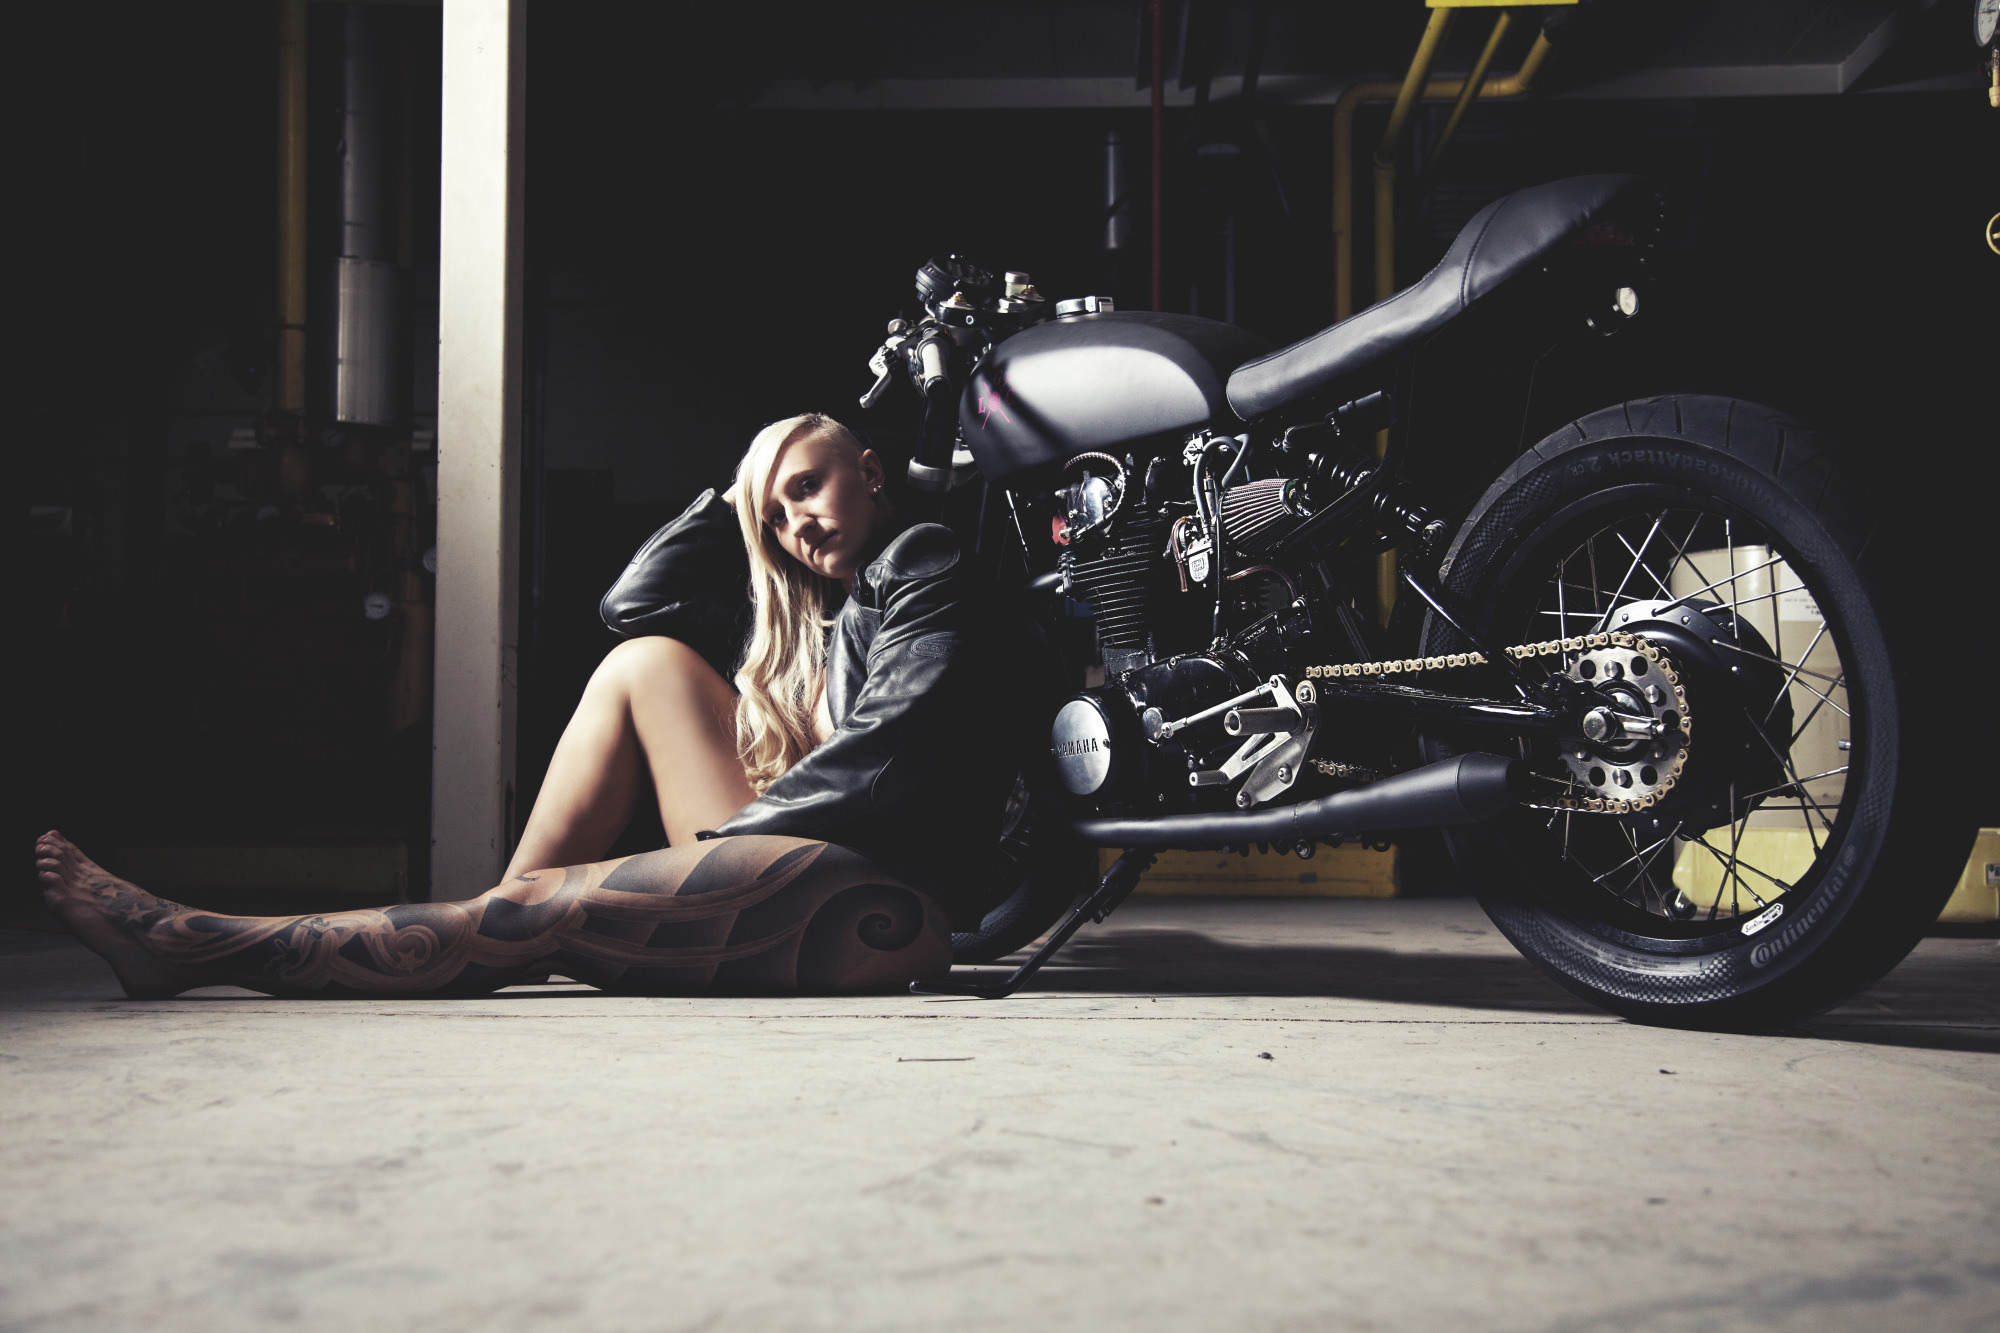 Kaillie Humphries' XS650 by Loaded Gun Customs.